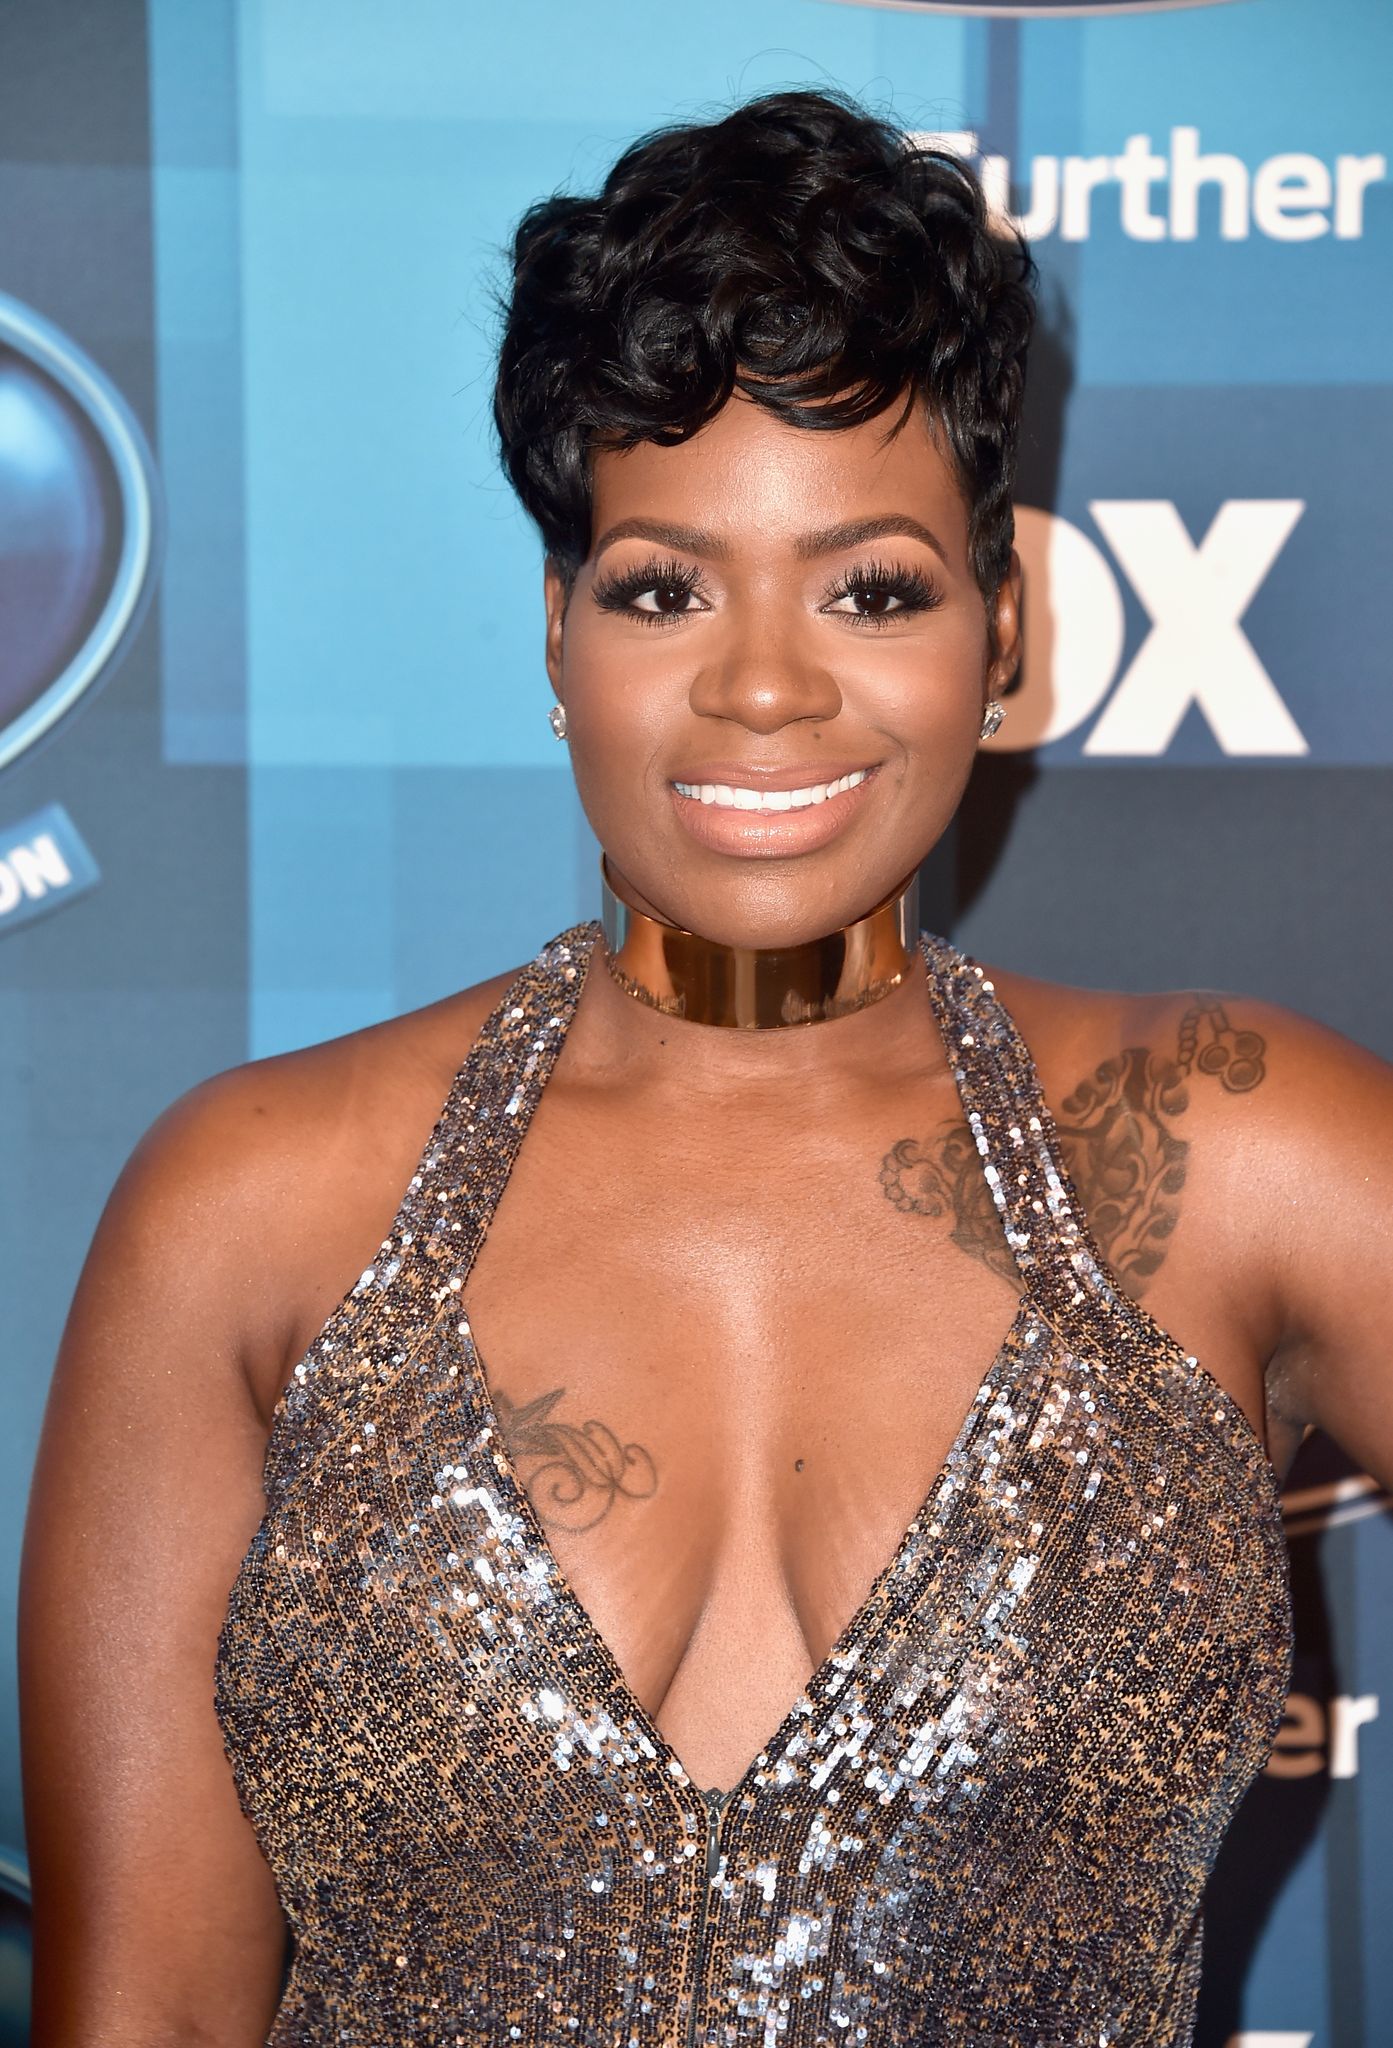 Fantasia Barrino at the finale of "American Idol" on April 7, 2016 in California. | Photo: Getty Images